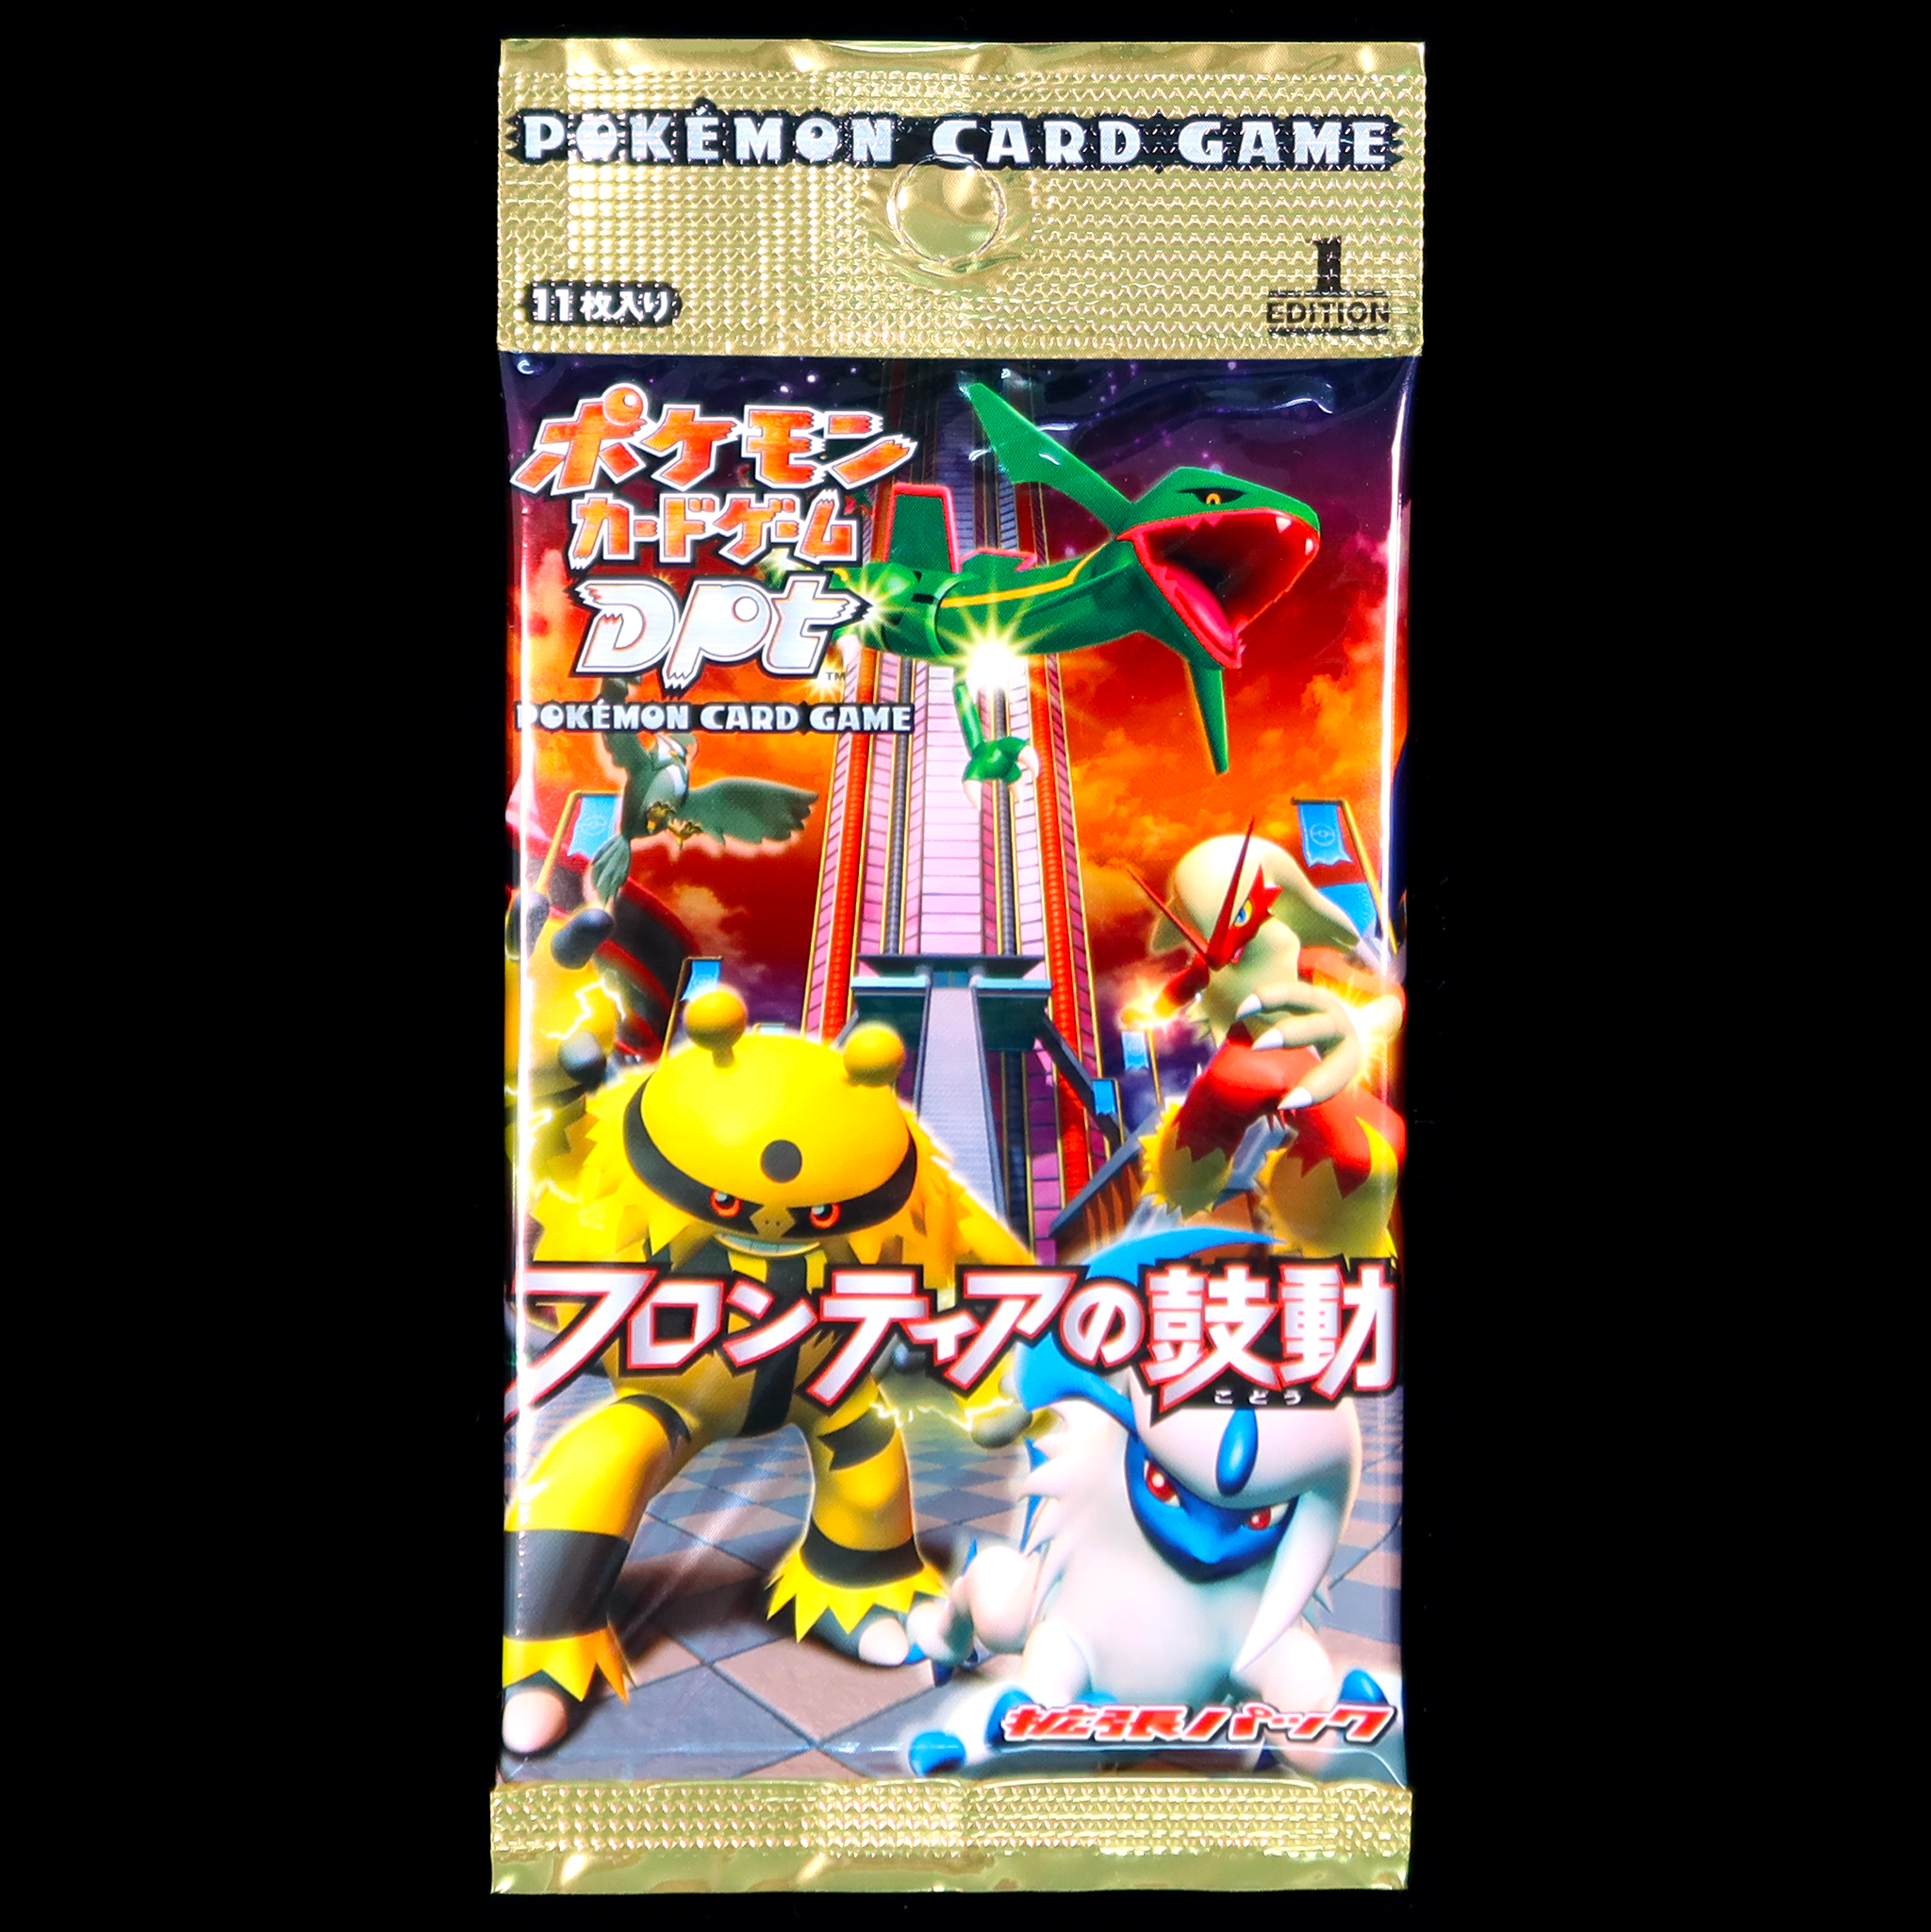 [DPt3] POKÉMON CARD GAME DPt Expansion pack ｢Beat of the Frontier｣ Booster 11 cards / Booster pack  Release date: March 6 2009  Japanese Pokemon Booster. Booster Pokemon japonais